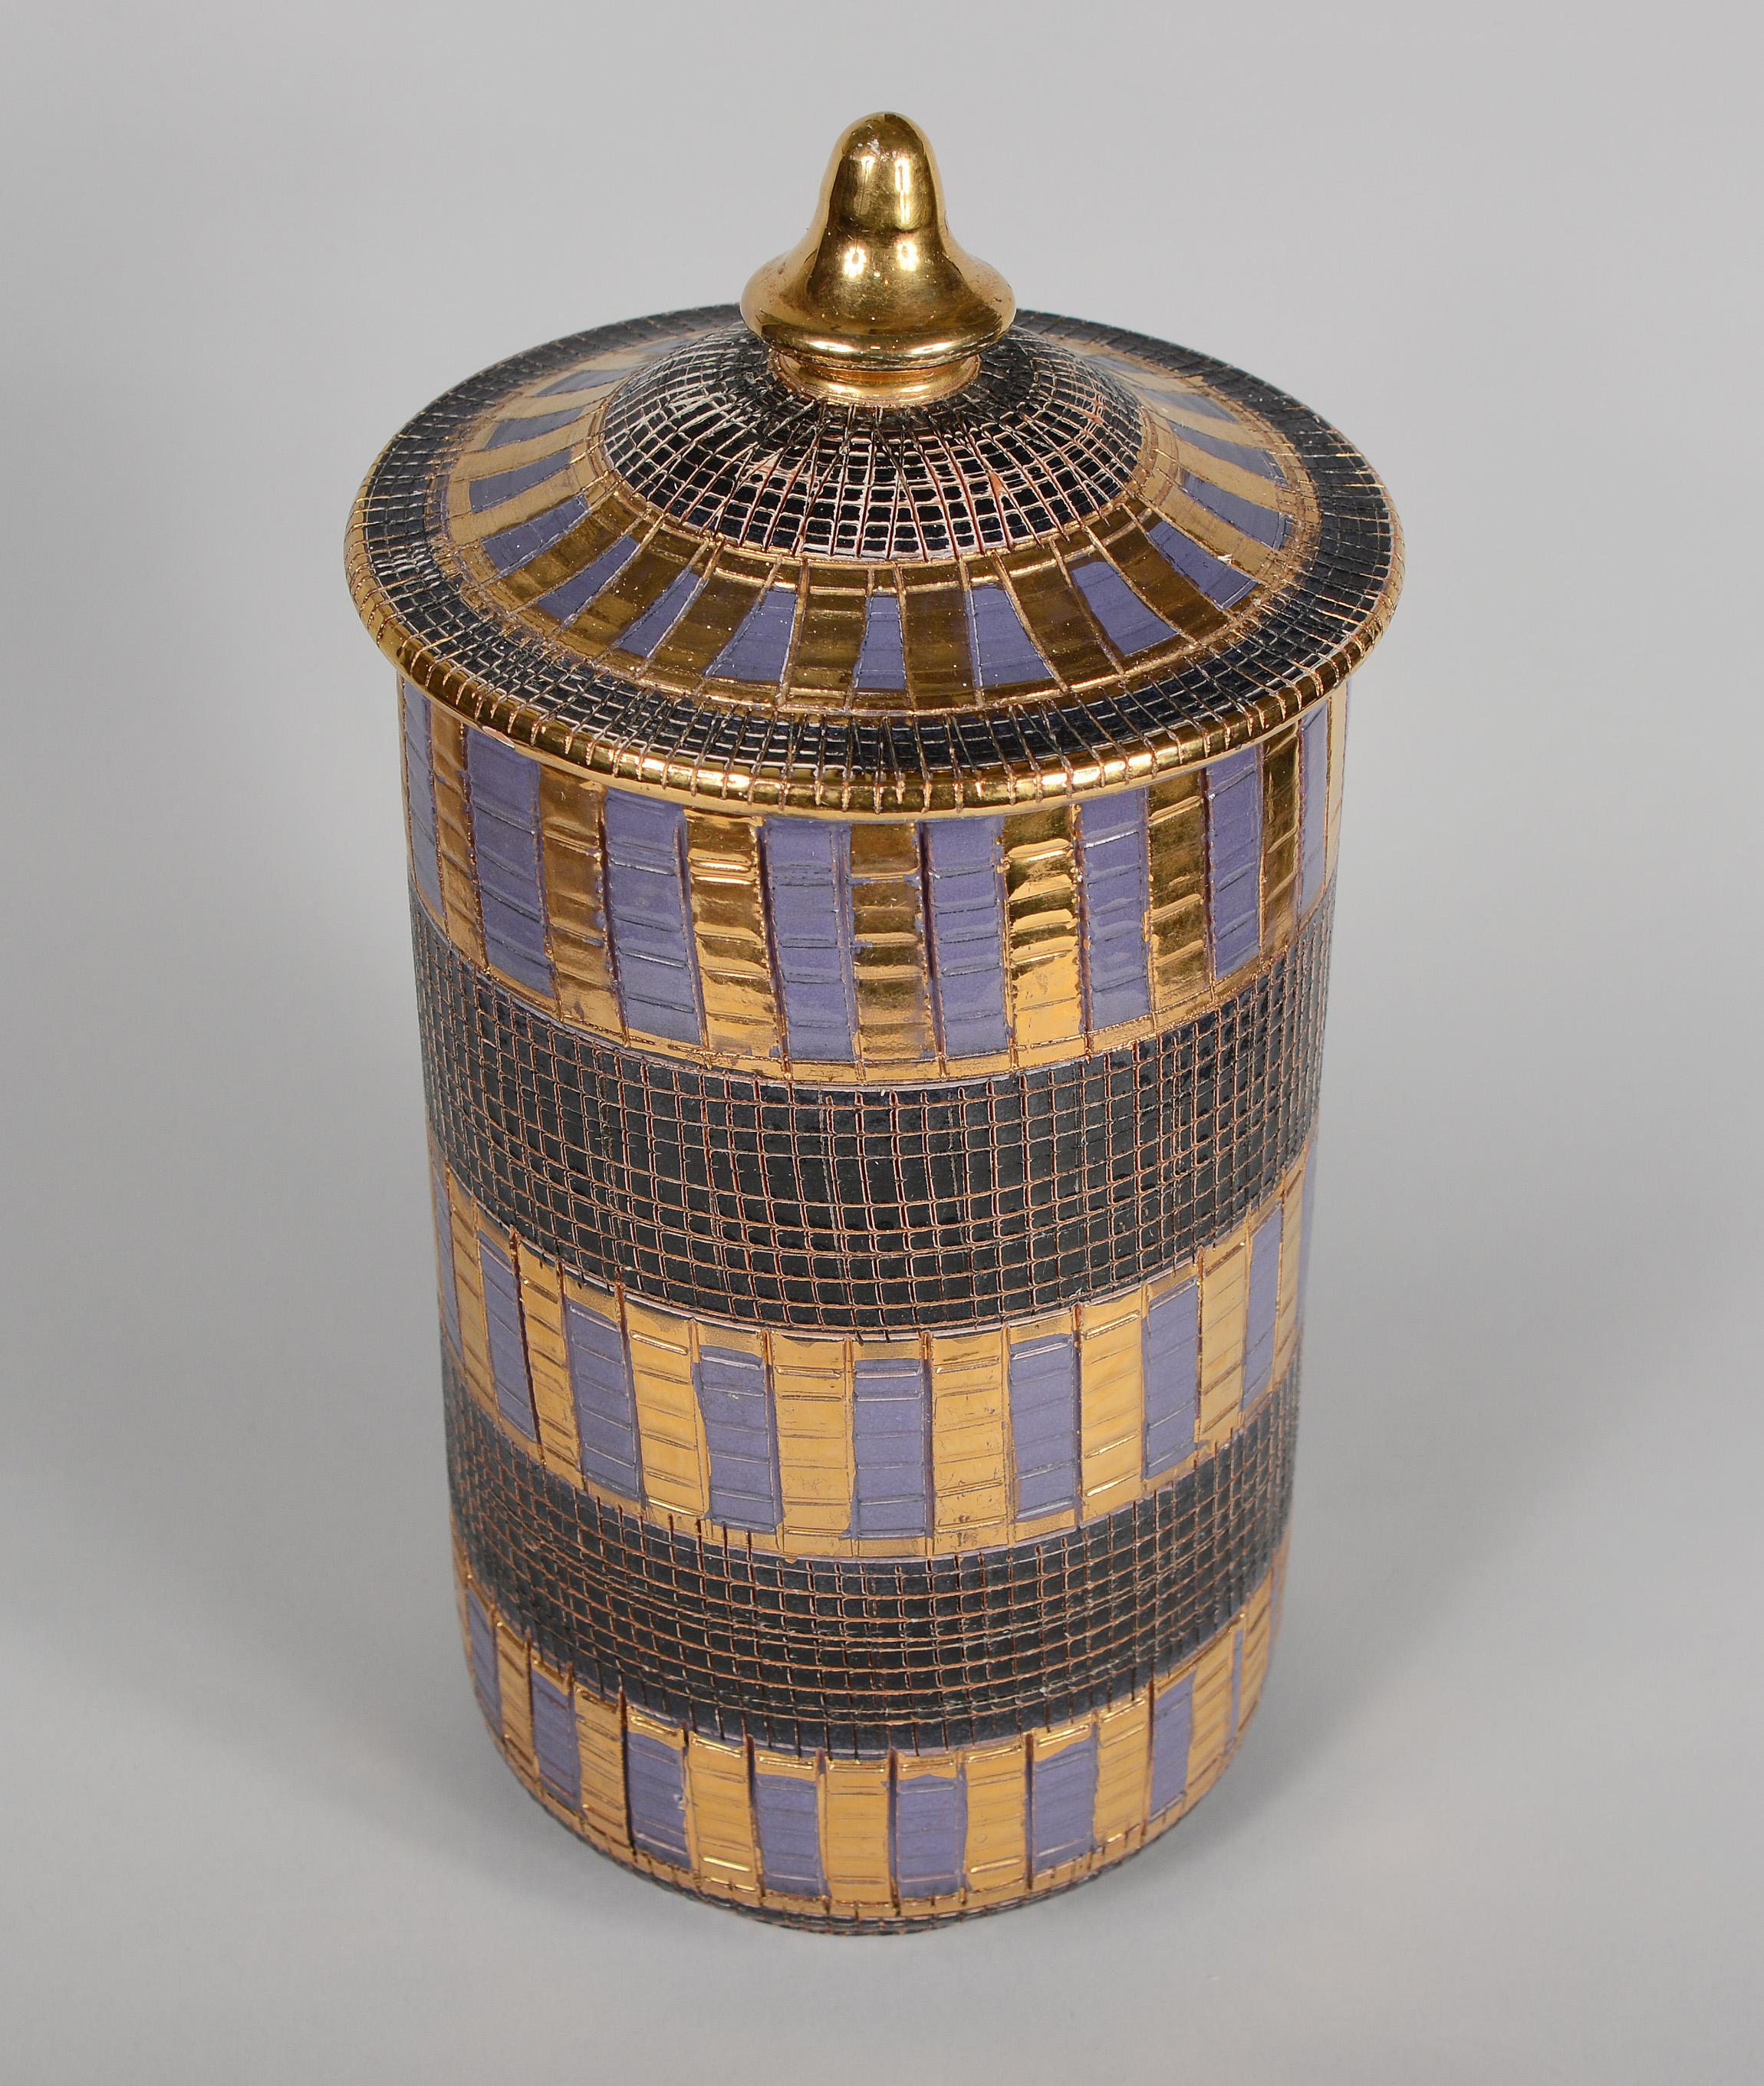 Covered jar from the Seta Series by Bitossi. This has gold and purple glaze with gold highlights. There are two small chips on the edge of the lid. There are few tiny glaze flakes on the edge of the jar rim.